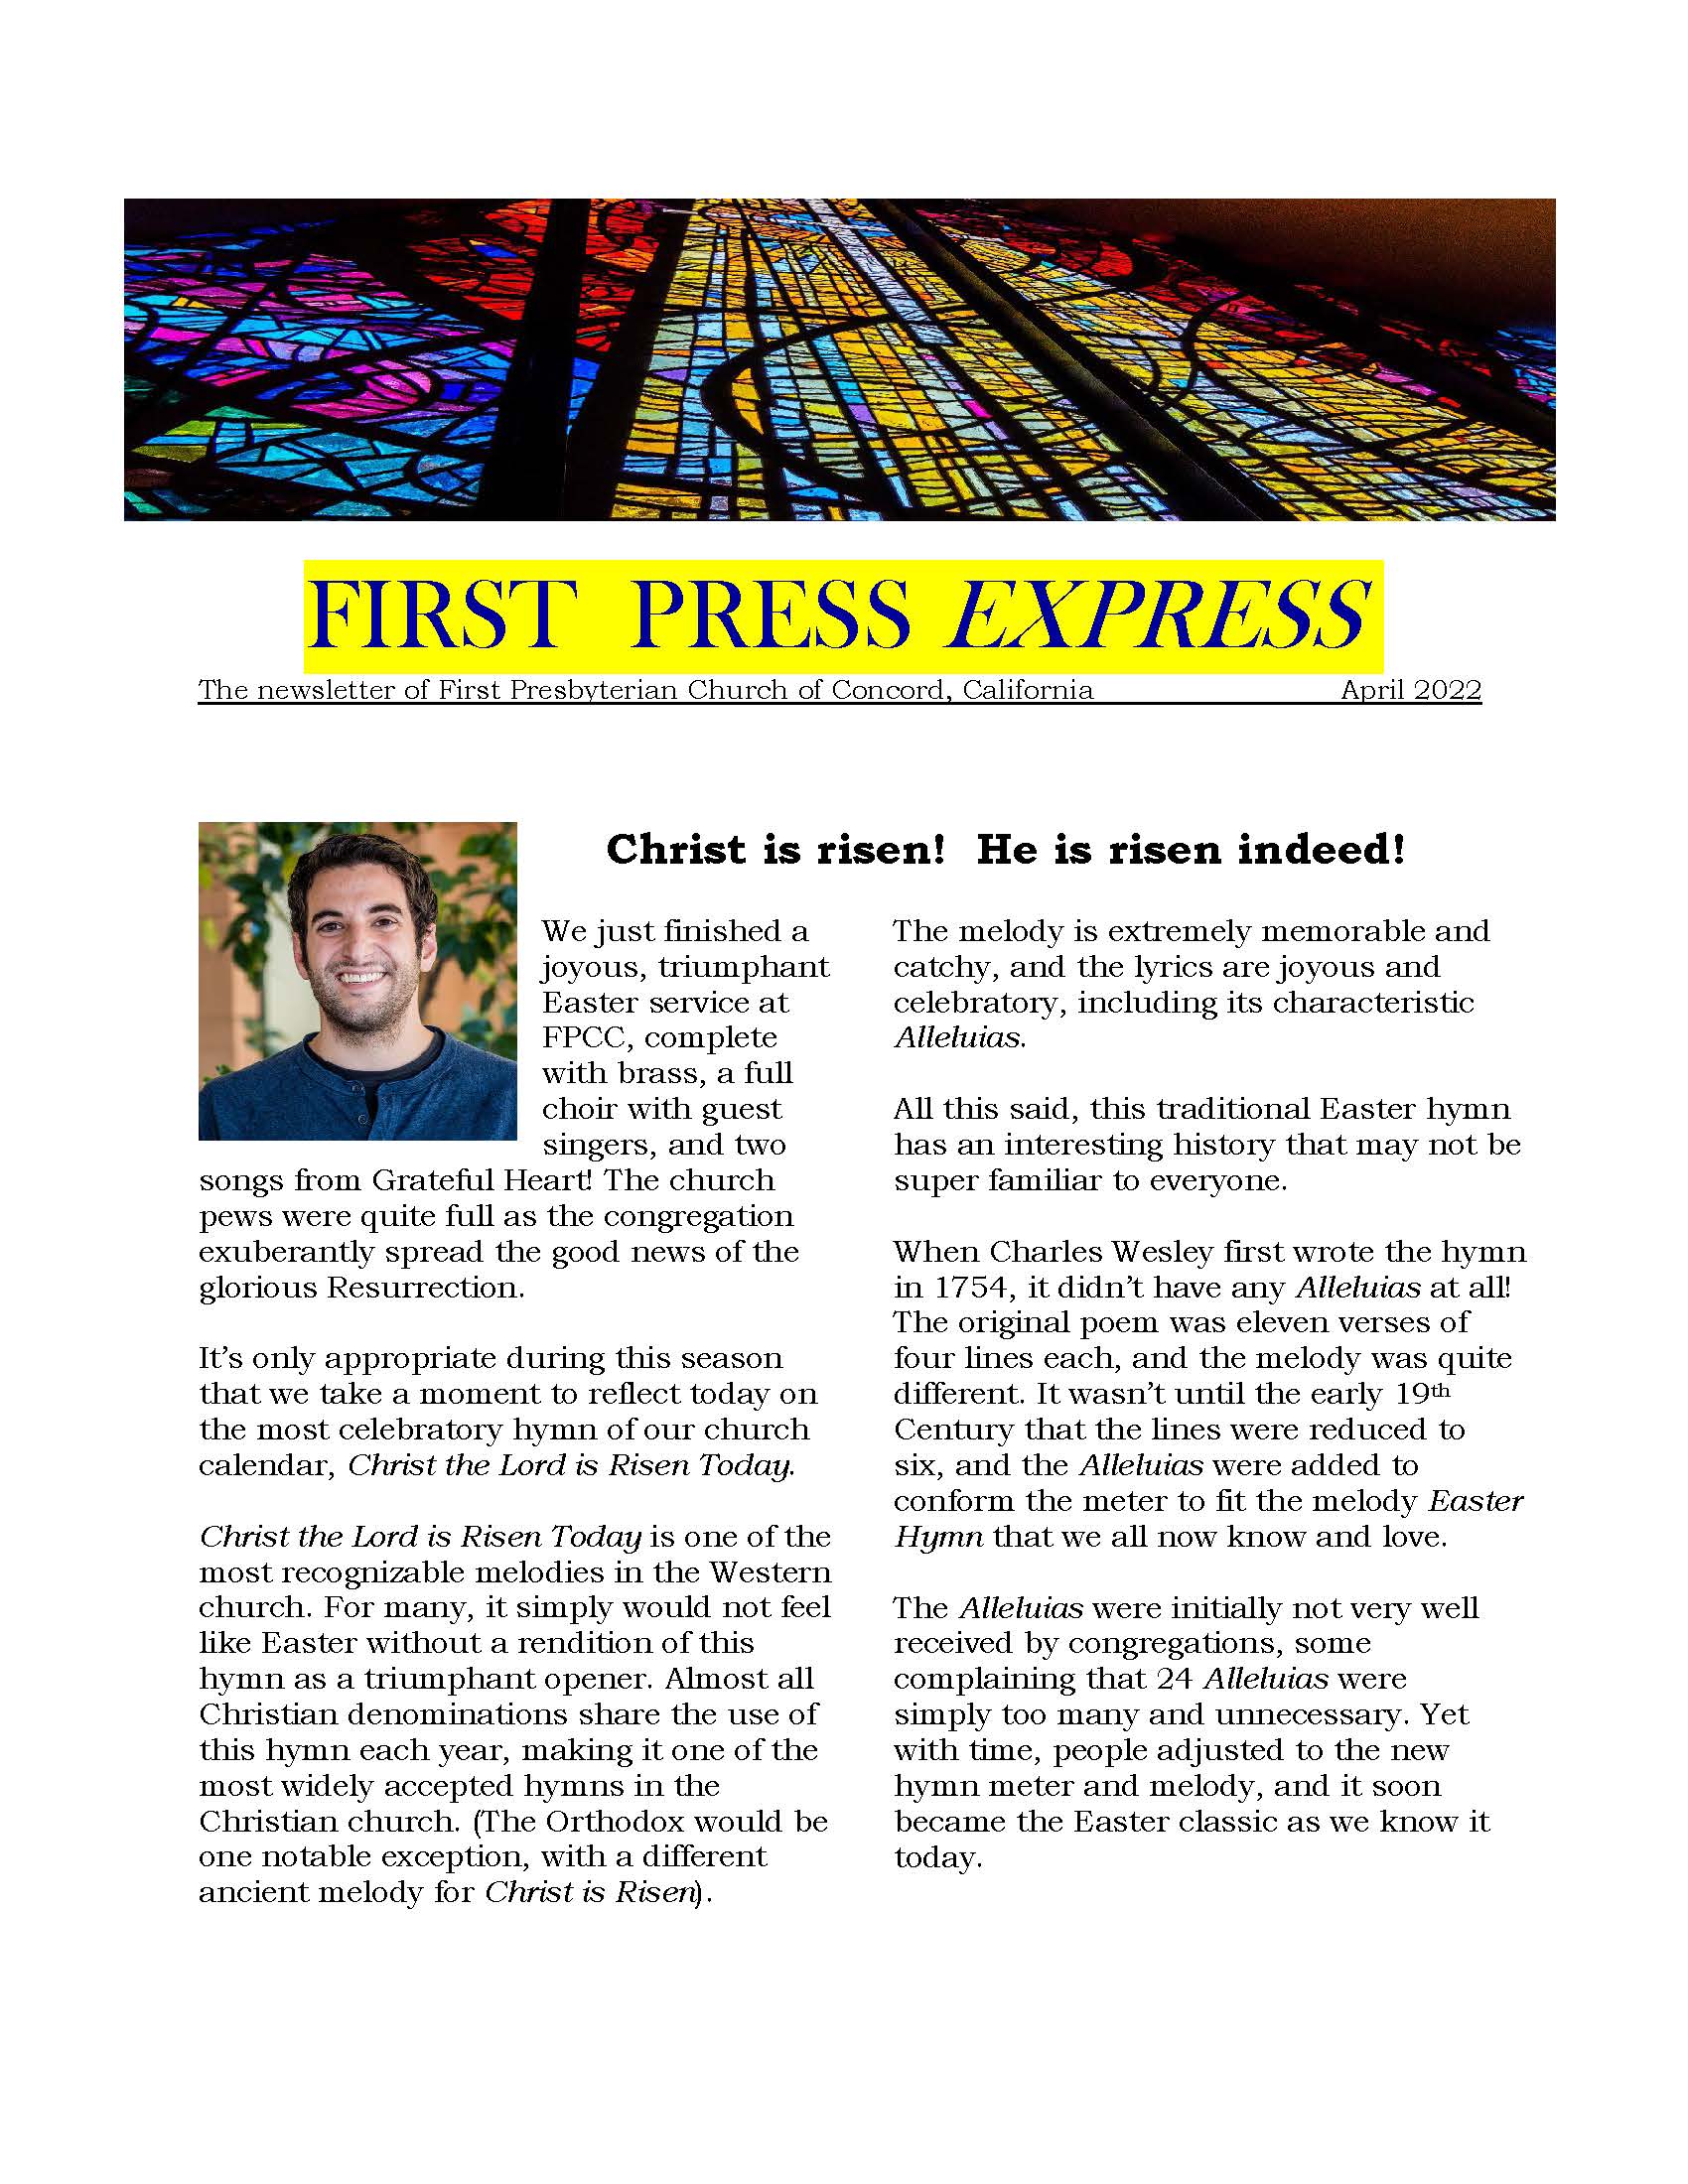 cover of first press express April 2022